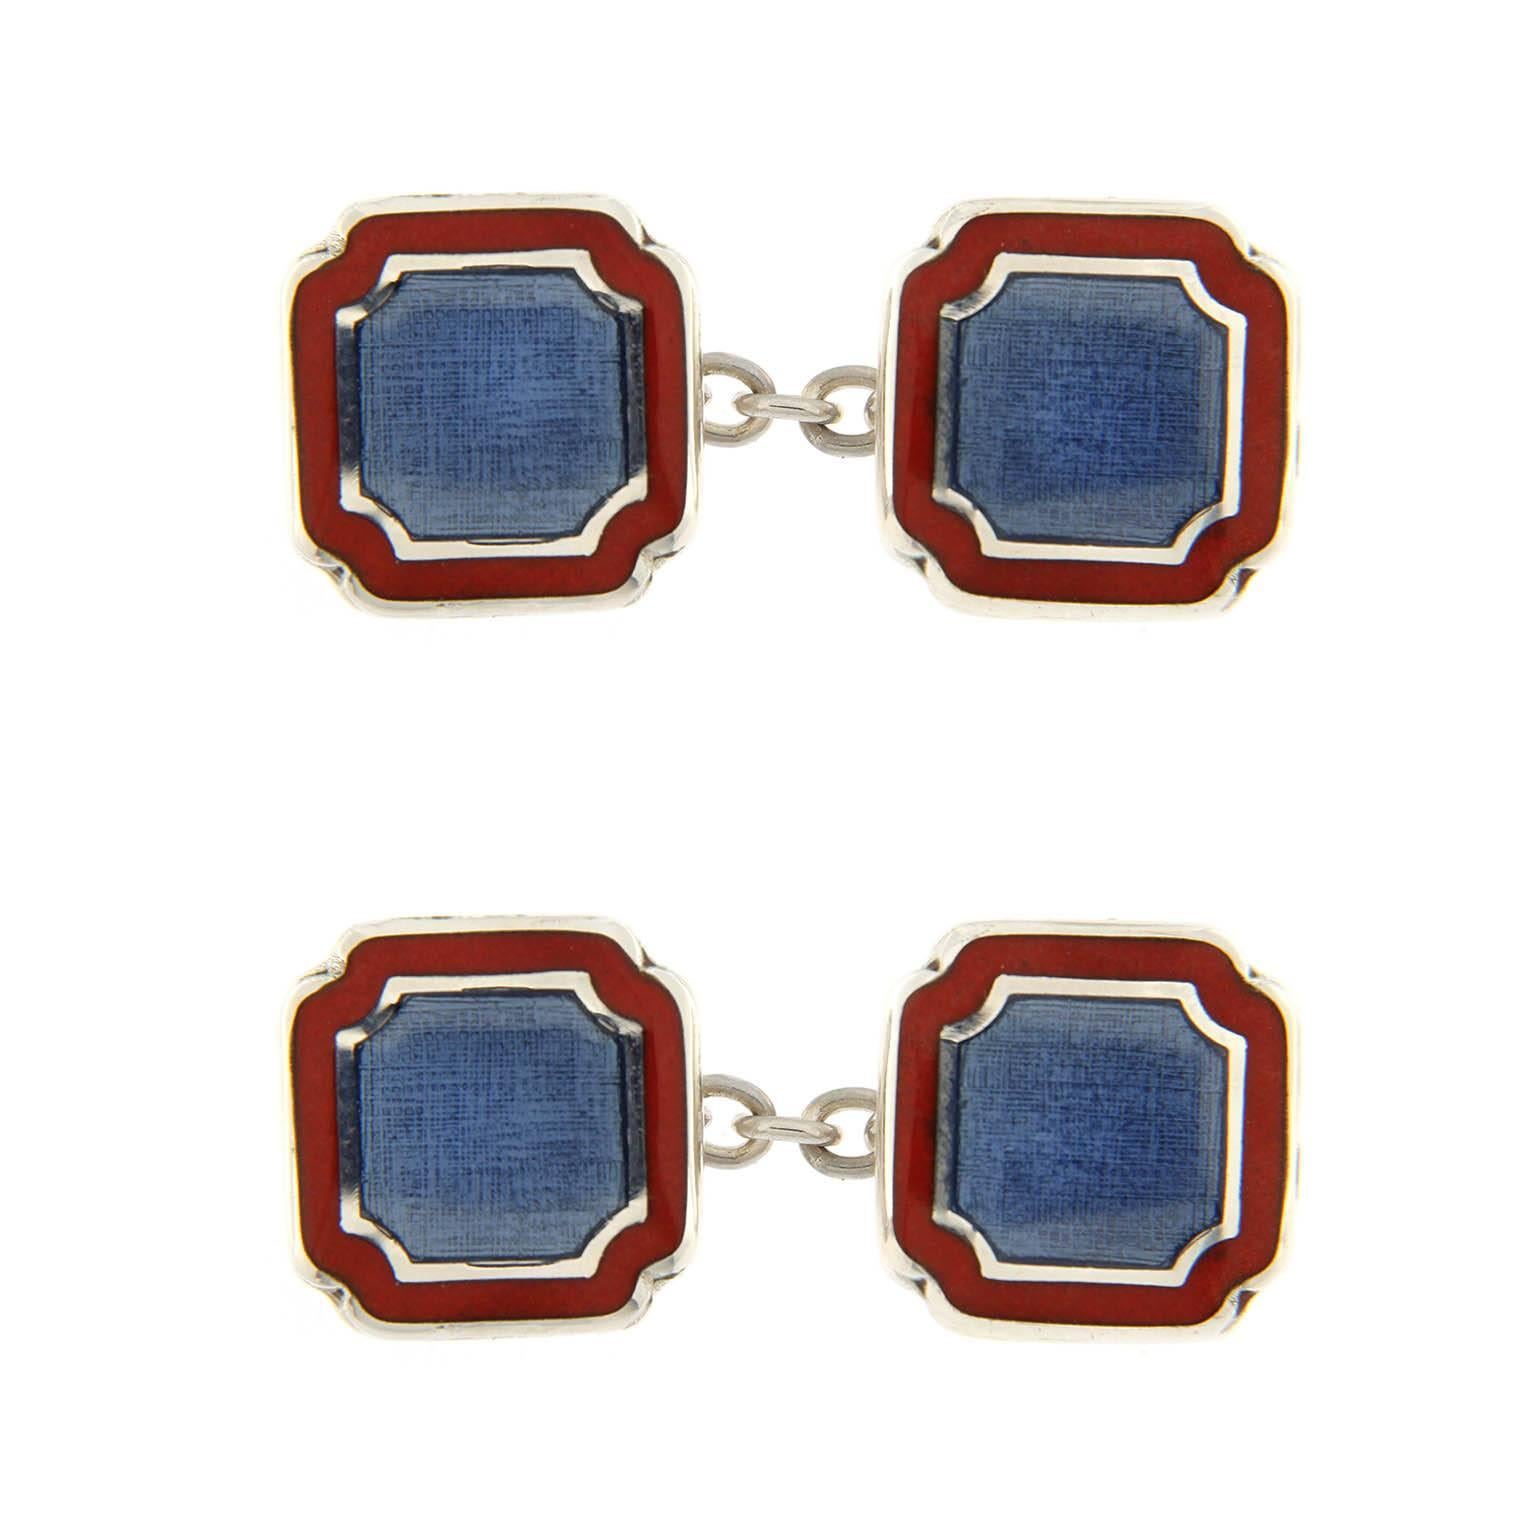 Jona design collection, hand crafted in Italy, sterling silver cufflinks with blue and red enamel.

All Jona jewelry is new and has never been previously owned or worn. Each item will arrive at your door beautifully gift wrapped in Jona boxes, put